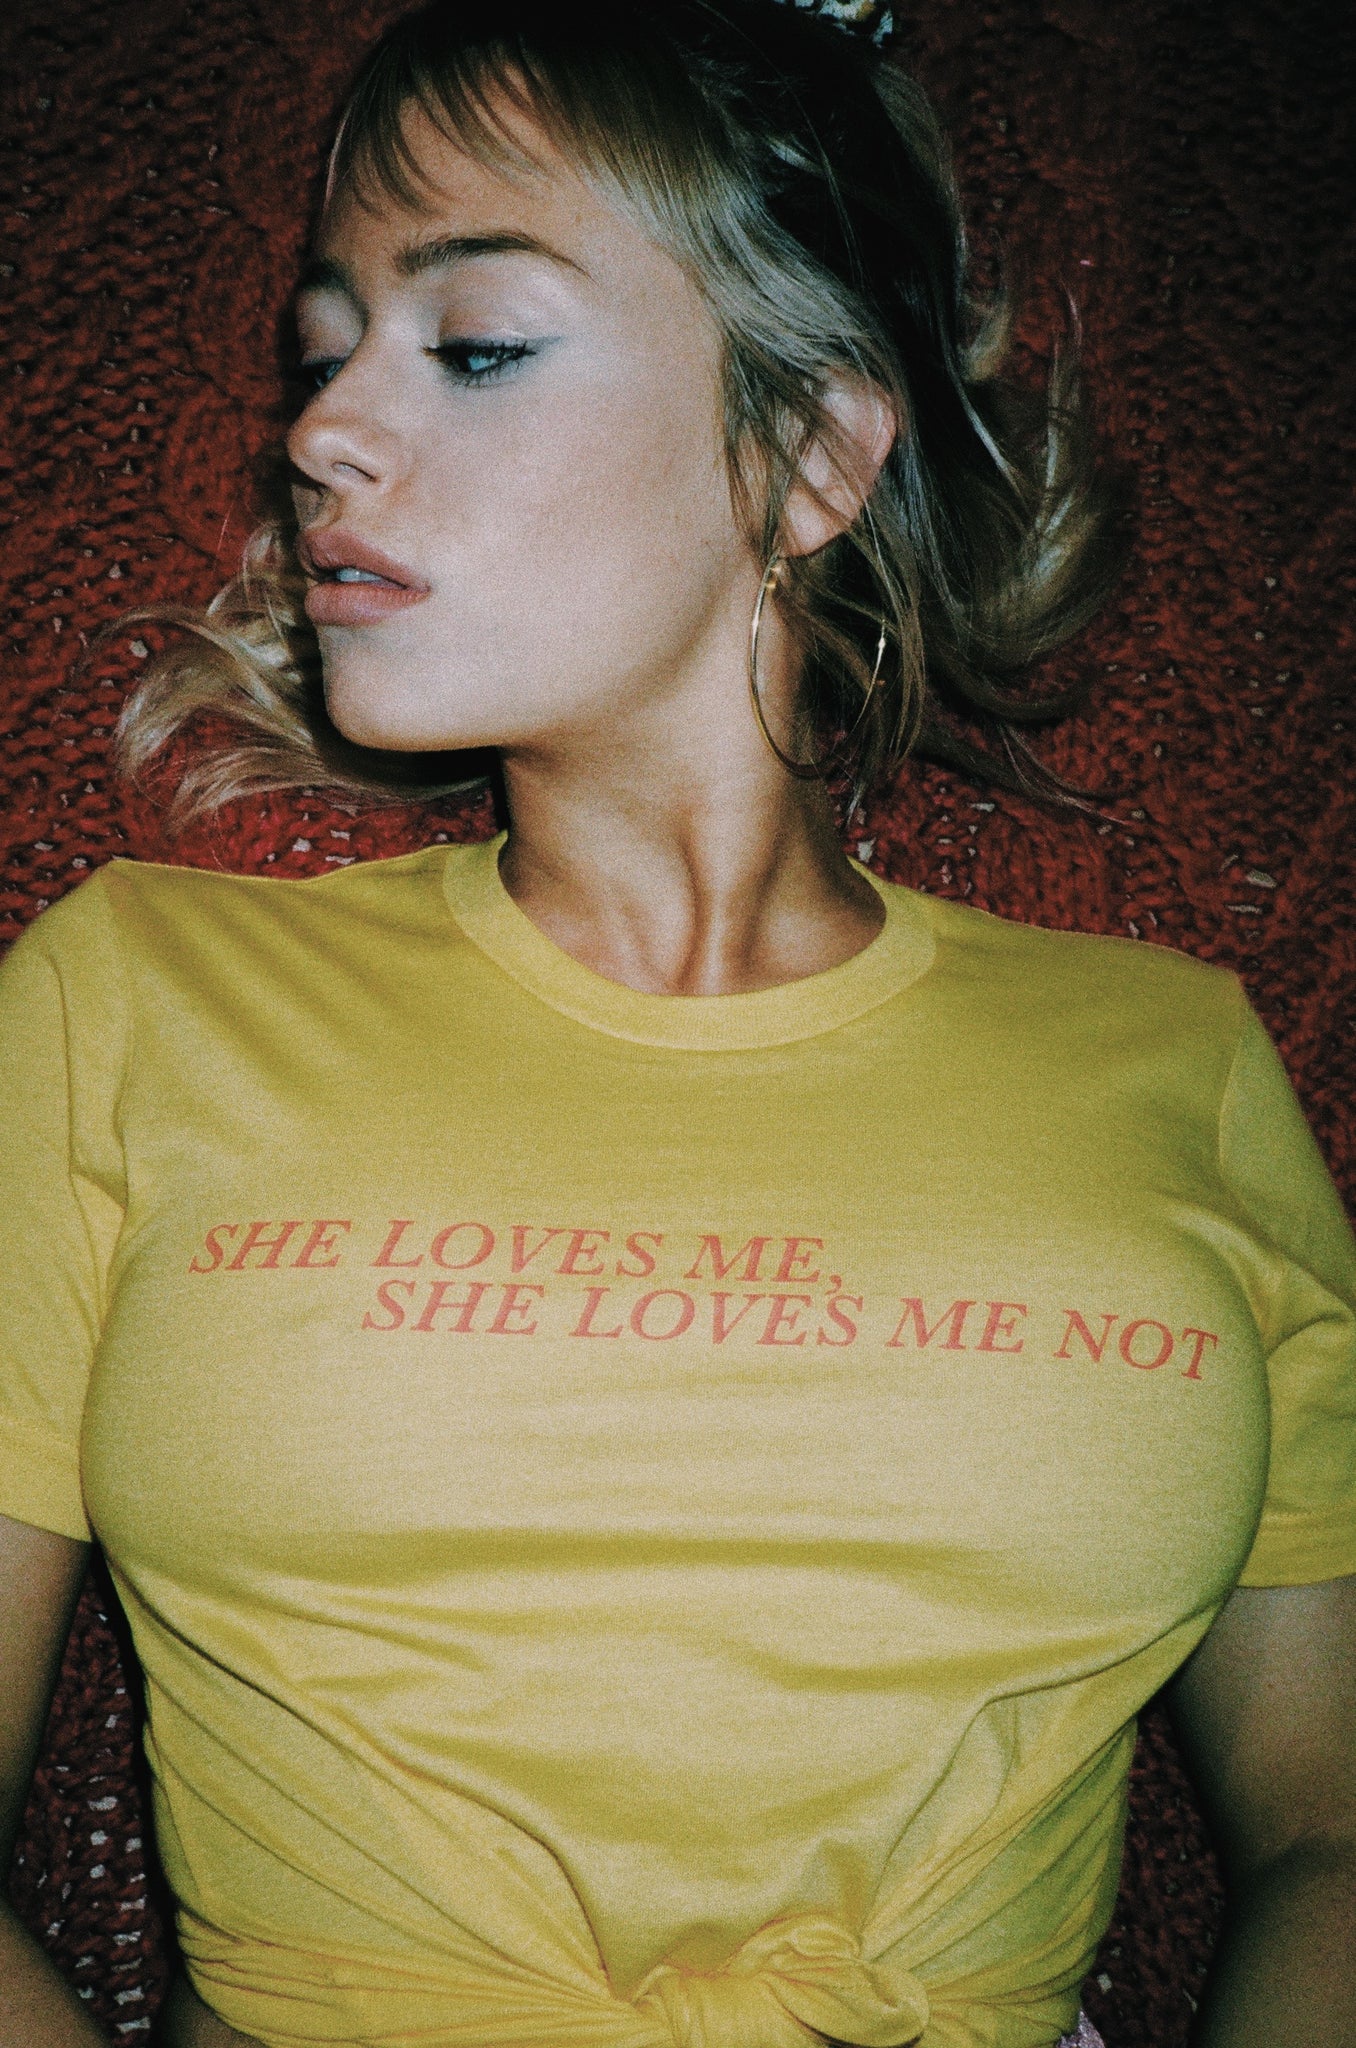 She Loves Me - Another Filthy Magazine - Photo 9